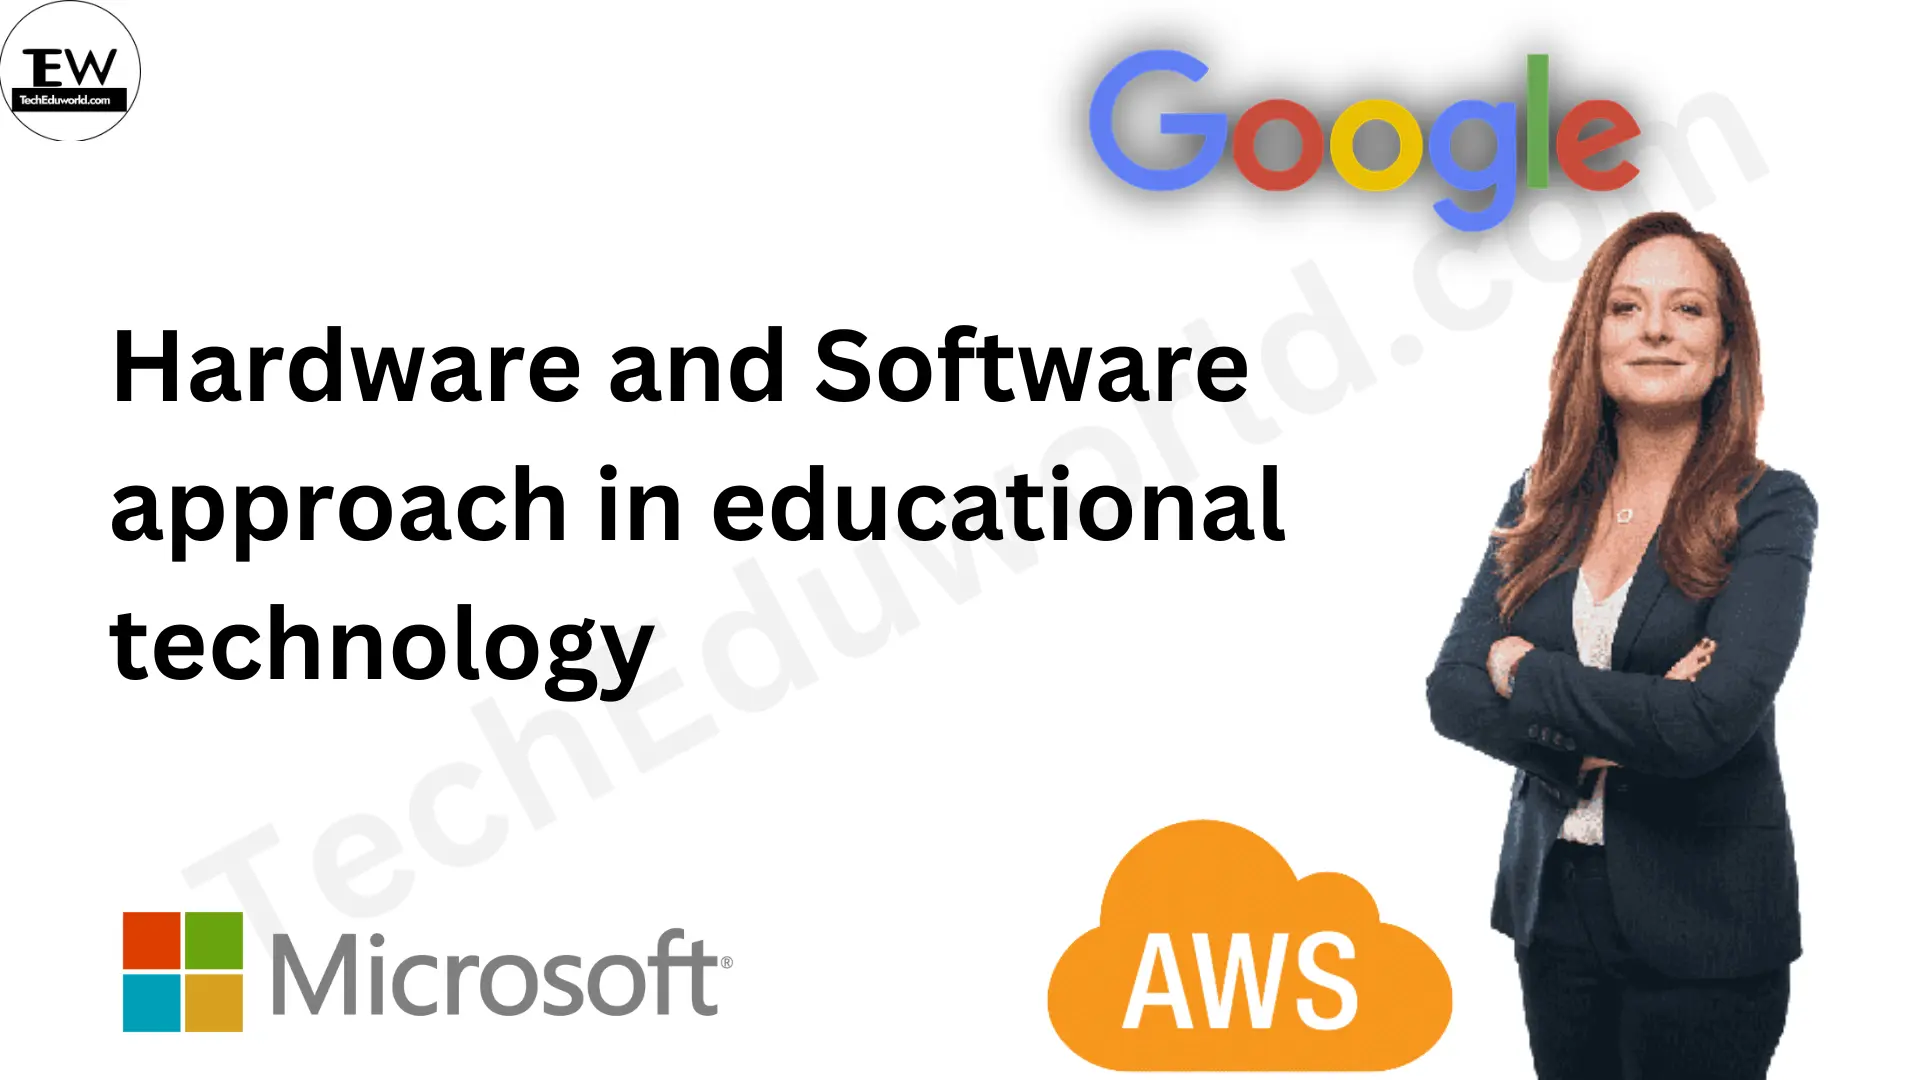 Hardware and Software approach in educational technology